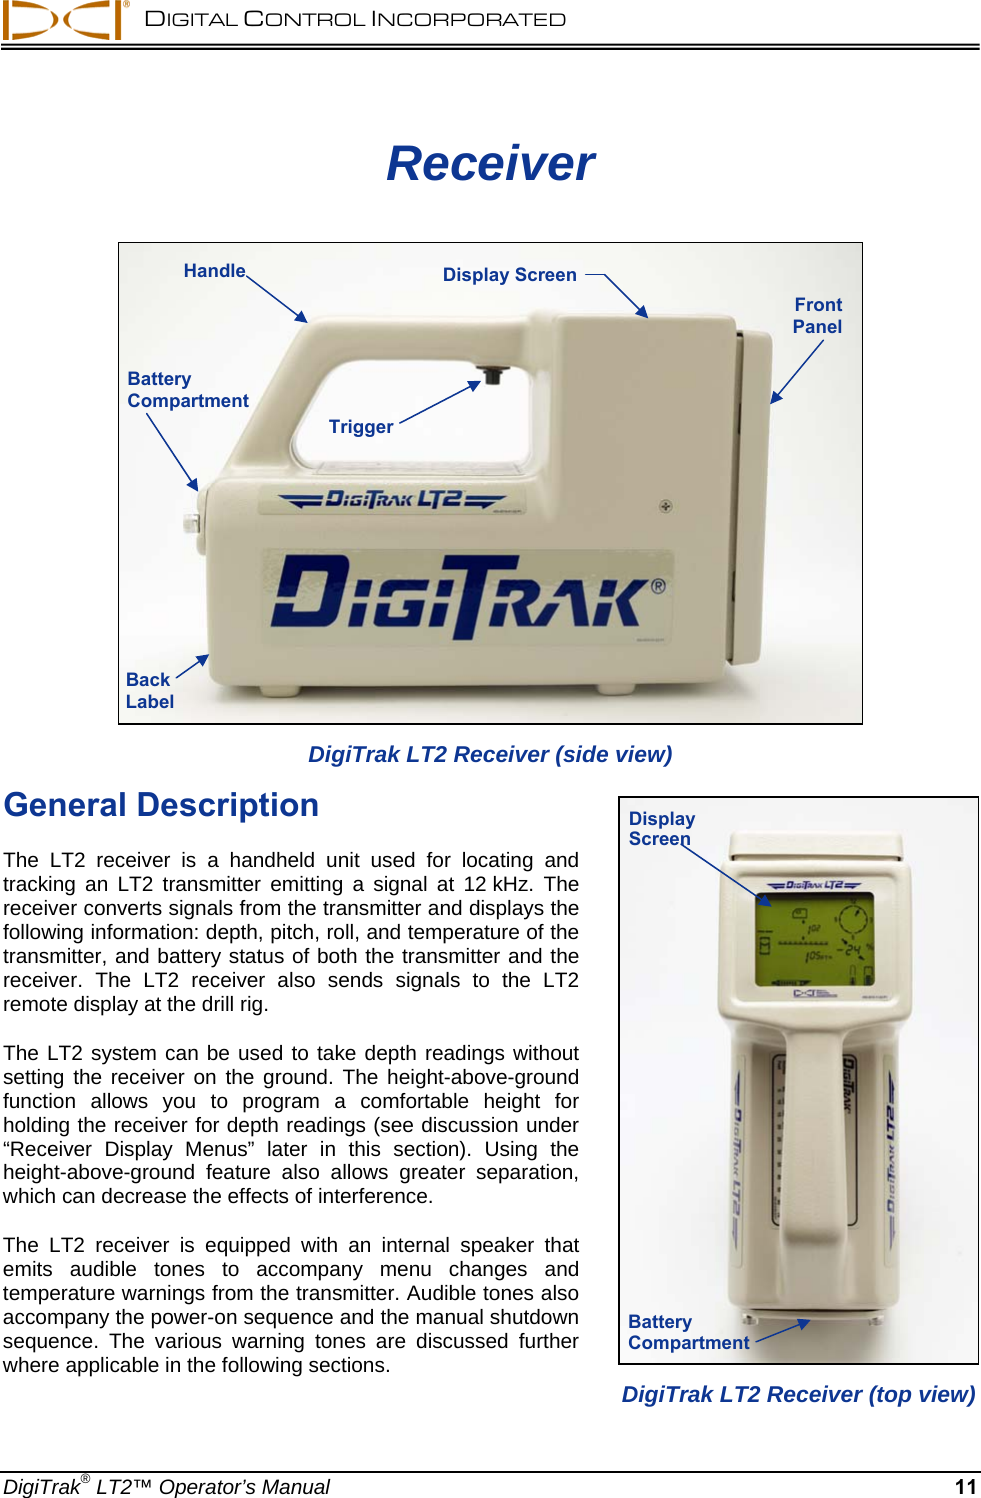   DIGITAL CONTROL INCORPORATED   Receiver  Handle  Display Screen Front  Panel Battery Compartment TriggerBack Label DigiTrak LT2 Receiver (side view)  General Description Battery Compartment Display Screen  The LT2 receiver is a handheld unit used for locating and tracking an LT2 transmitter emitting a signal at 12 kHz. The receiver converts signals from the transmitter and displays the following information: depth, pitch, roll, and temperature of the transmitter, and battery status of both the transmitter and the receiver. The LT2 receiver also sends signals to the LT2 remote display at the drill rig. The LT2 system can be used to take depth readings without setting the receiver on the ground. The height-above-ground function allows you to program a comfortable height for holding the receiver for depth readings (see discussion under “Receiver Display Menus” later in this section). Using the height-above-ground feature also allows greater separation, which can decrease the effects of interference.  The LT2 receiver is equipped with an internal speaker that emits audible tones to accompany menu changes and temperature warnings from the transmitter. Audible tones also accompany the power-on sequence and the manual shutdown sequence. The various warning tones are discussed further where applicable in the following sections. DigiTrak LT2 Receiver (top view) DigiTrak® LT2™ Operator’s Manual 11 